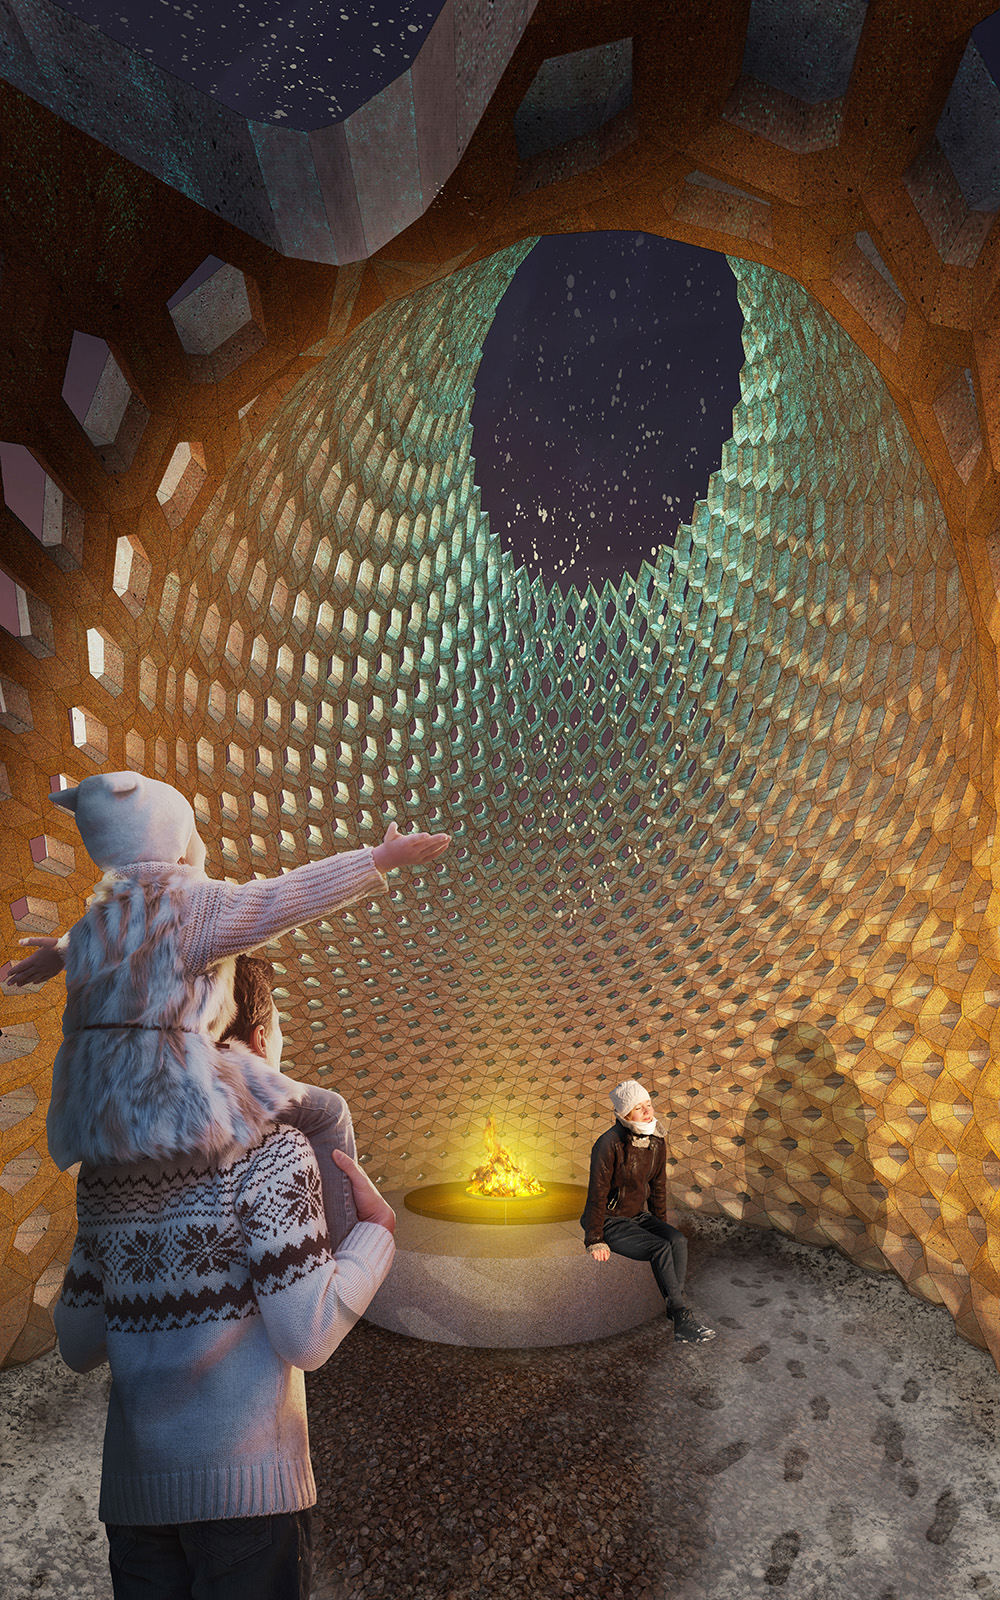 Inside of the structure. Rendering with people for scale.